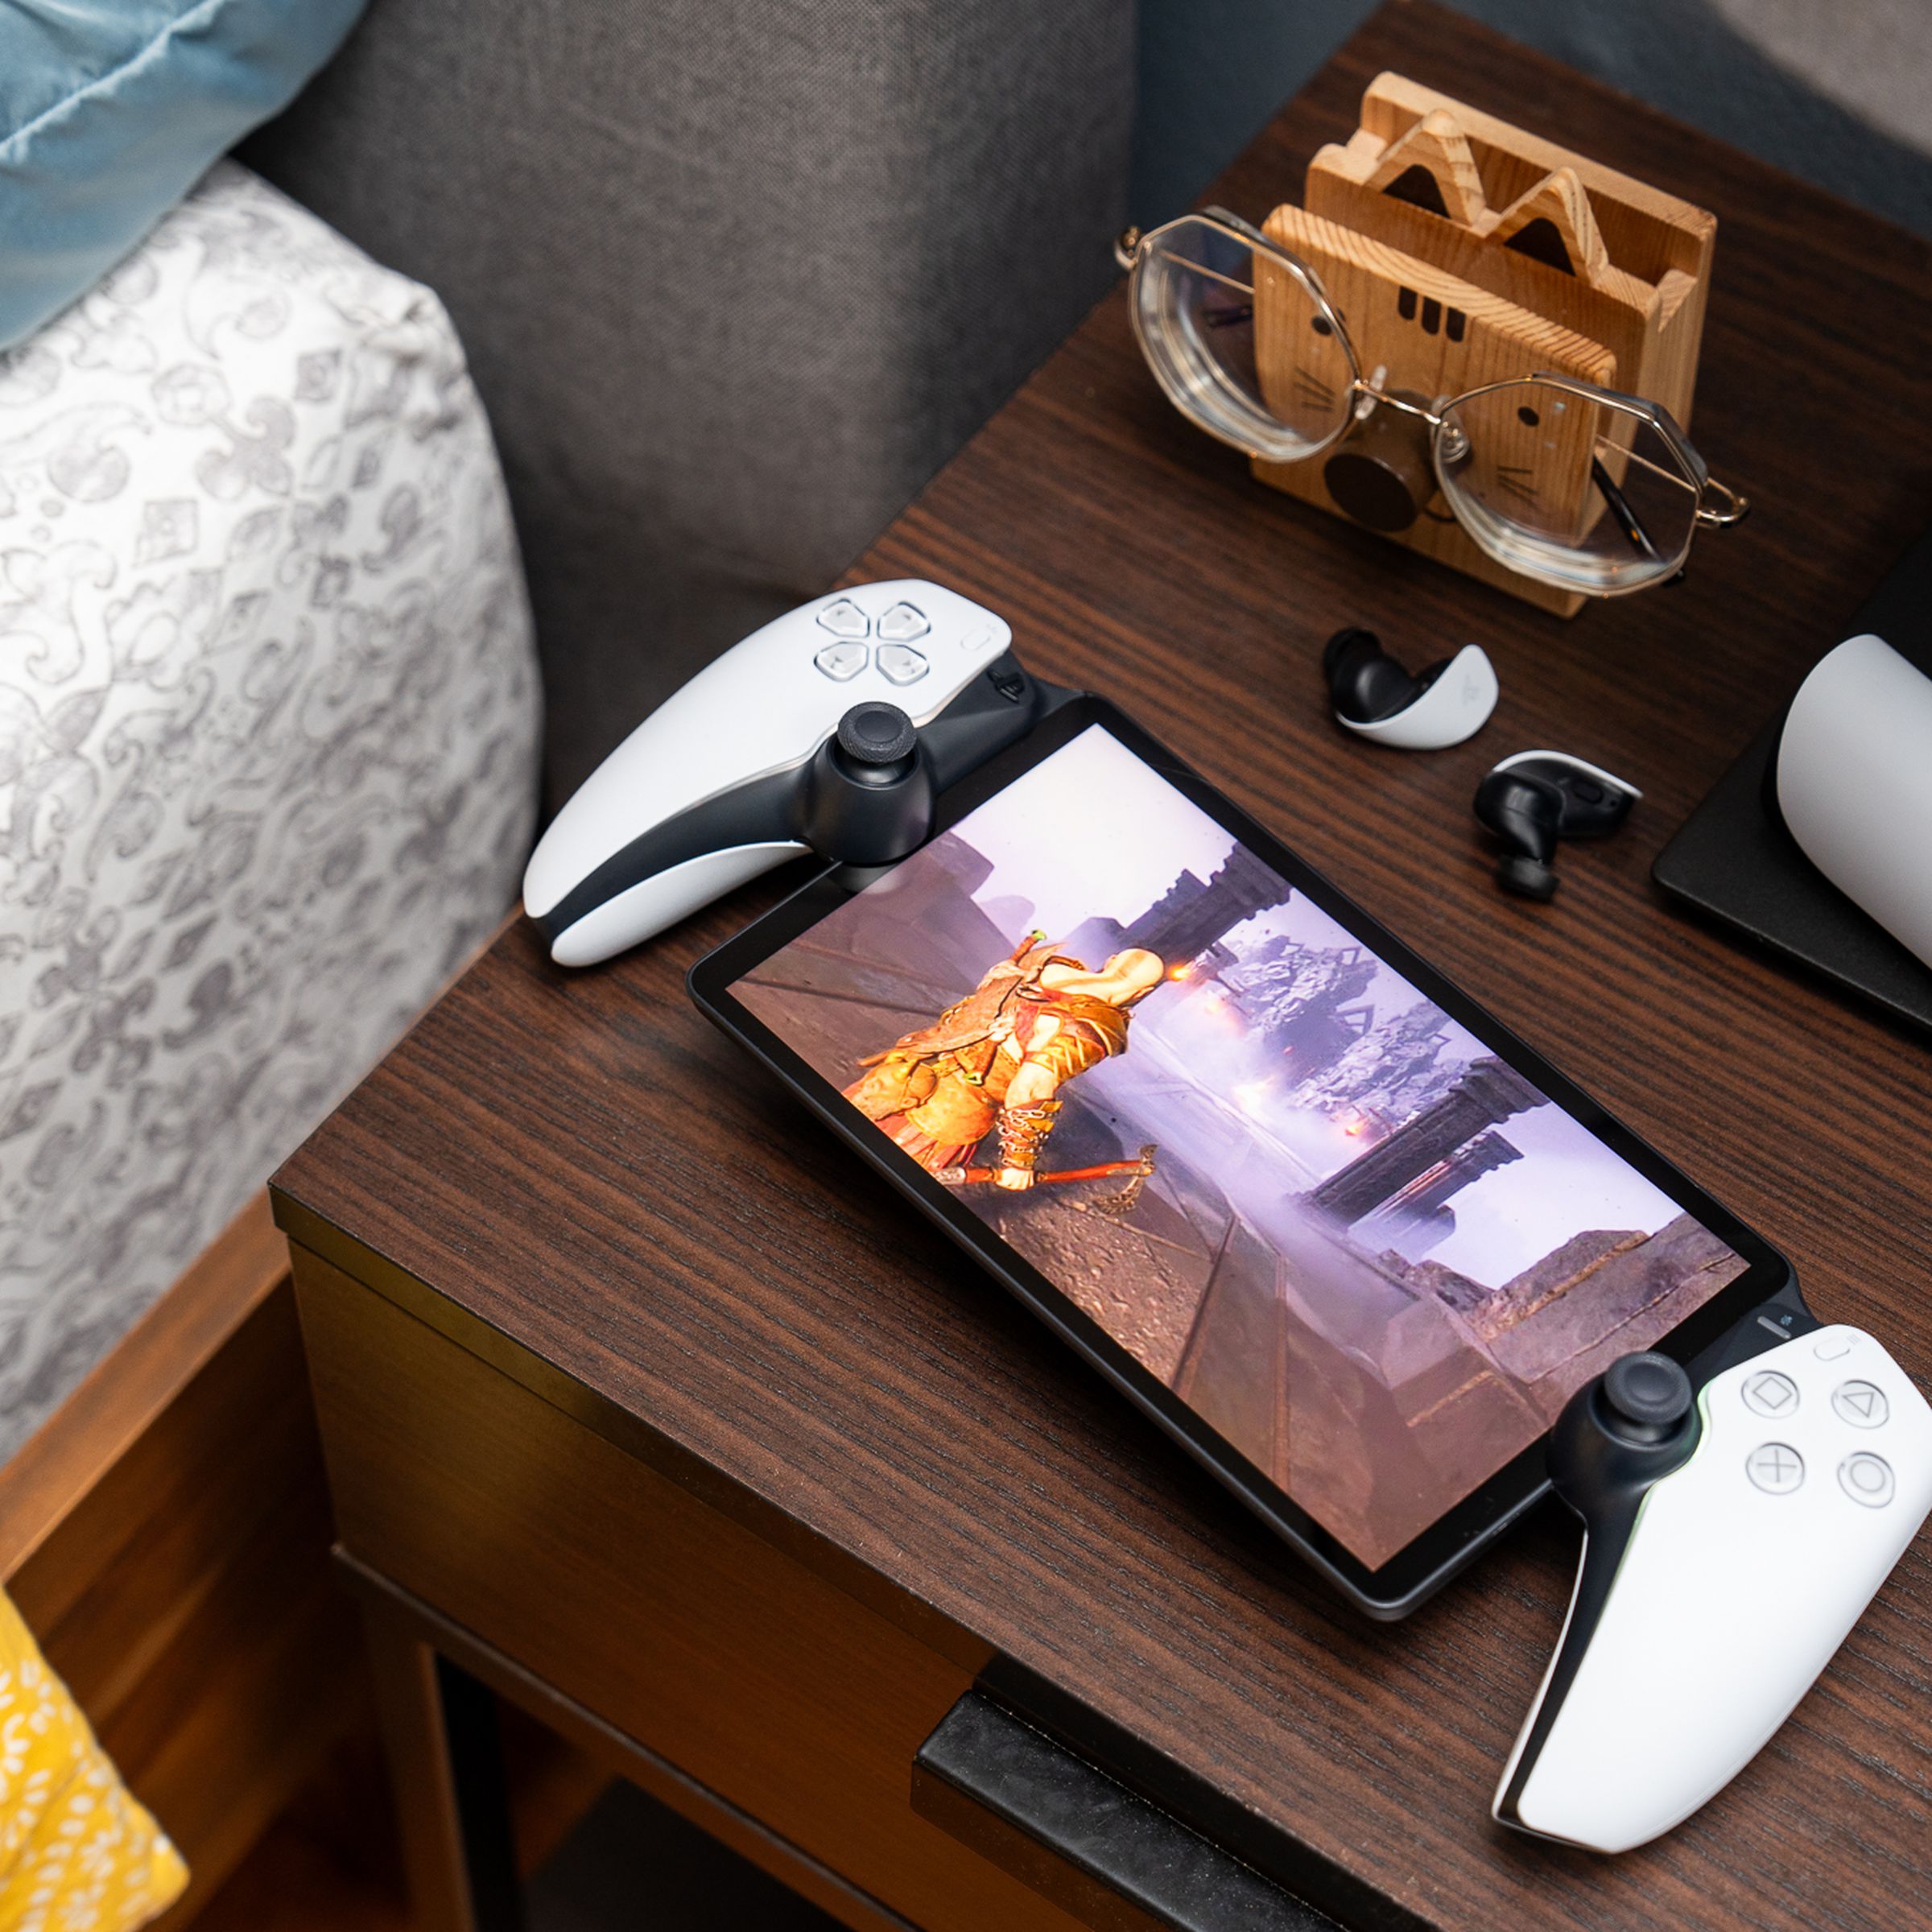 The PlayStation Portal sitting on a bedside table with a pair of earbuds. The handheld gaming device is streaming God of War: Ragnarök off a PlayStation 5.